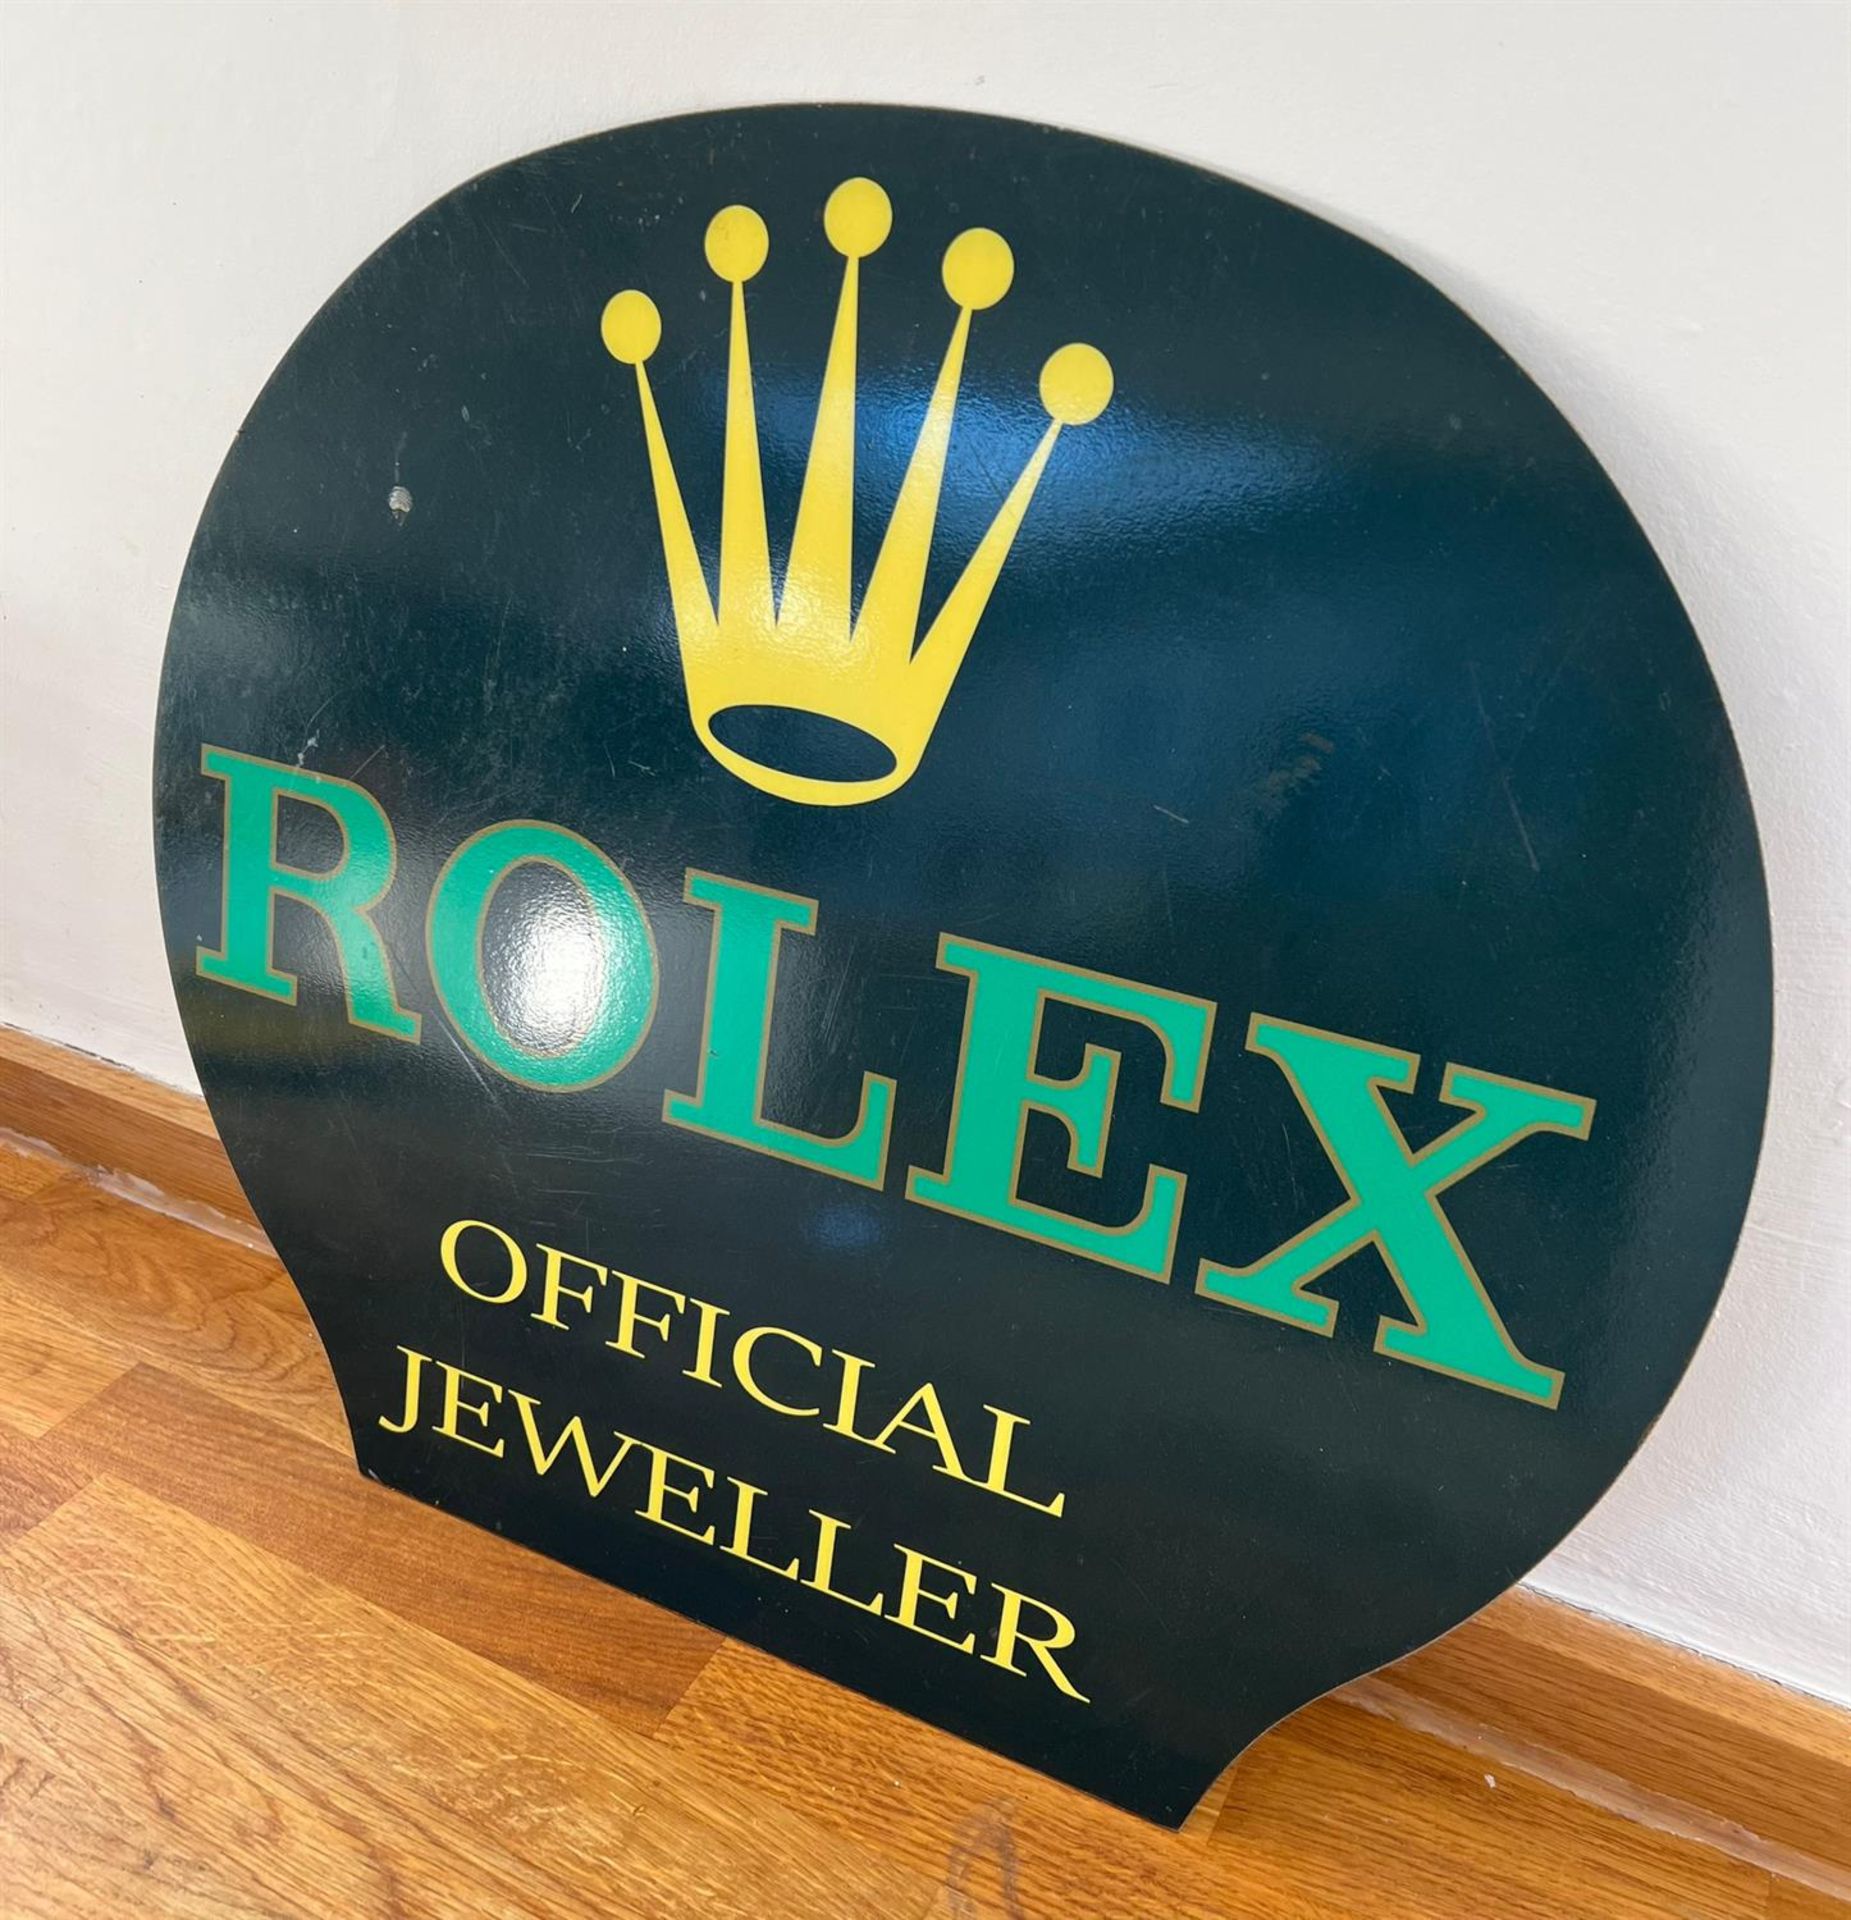 A Rare 'Rolex' Enamelled Tin-Plate Advertising Sign - Image 3 of 10